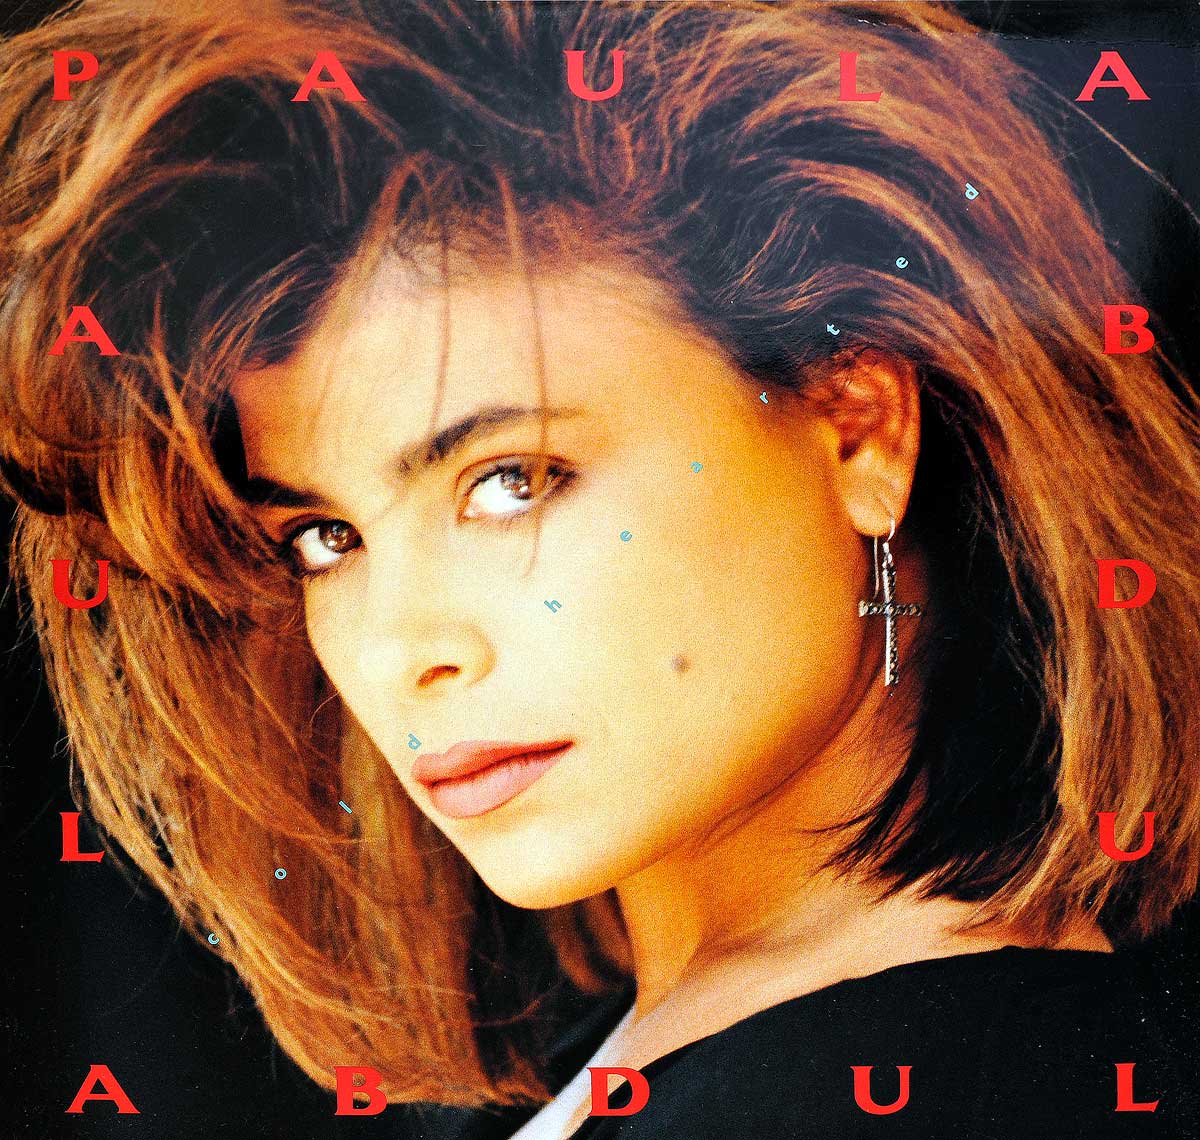 large album front cover photo of: PAULA ABDUL COLD HEARTED Extended Version 12" MAXI VINYL